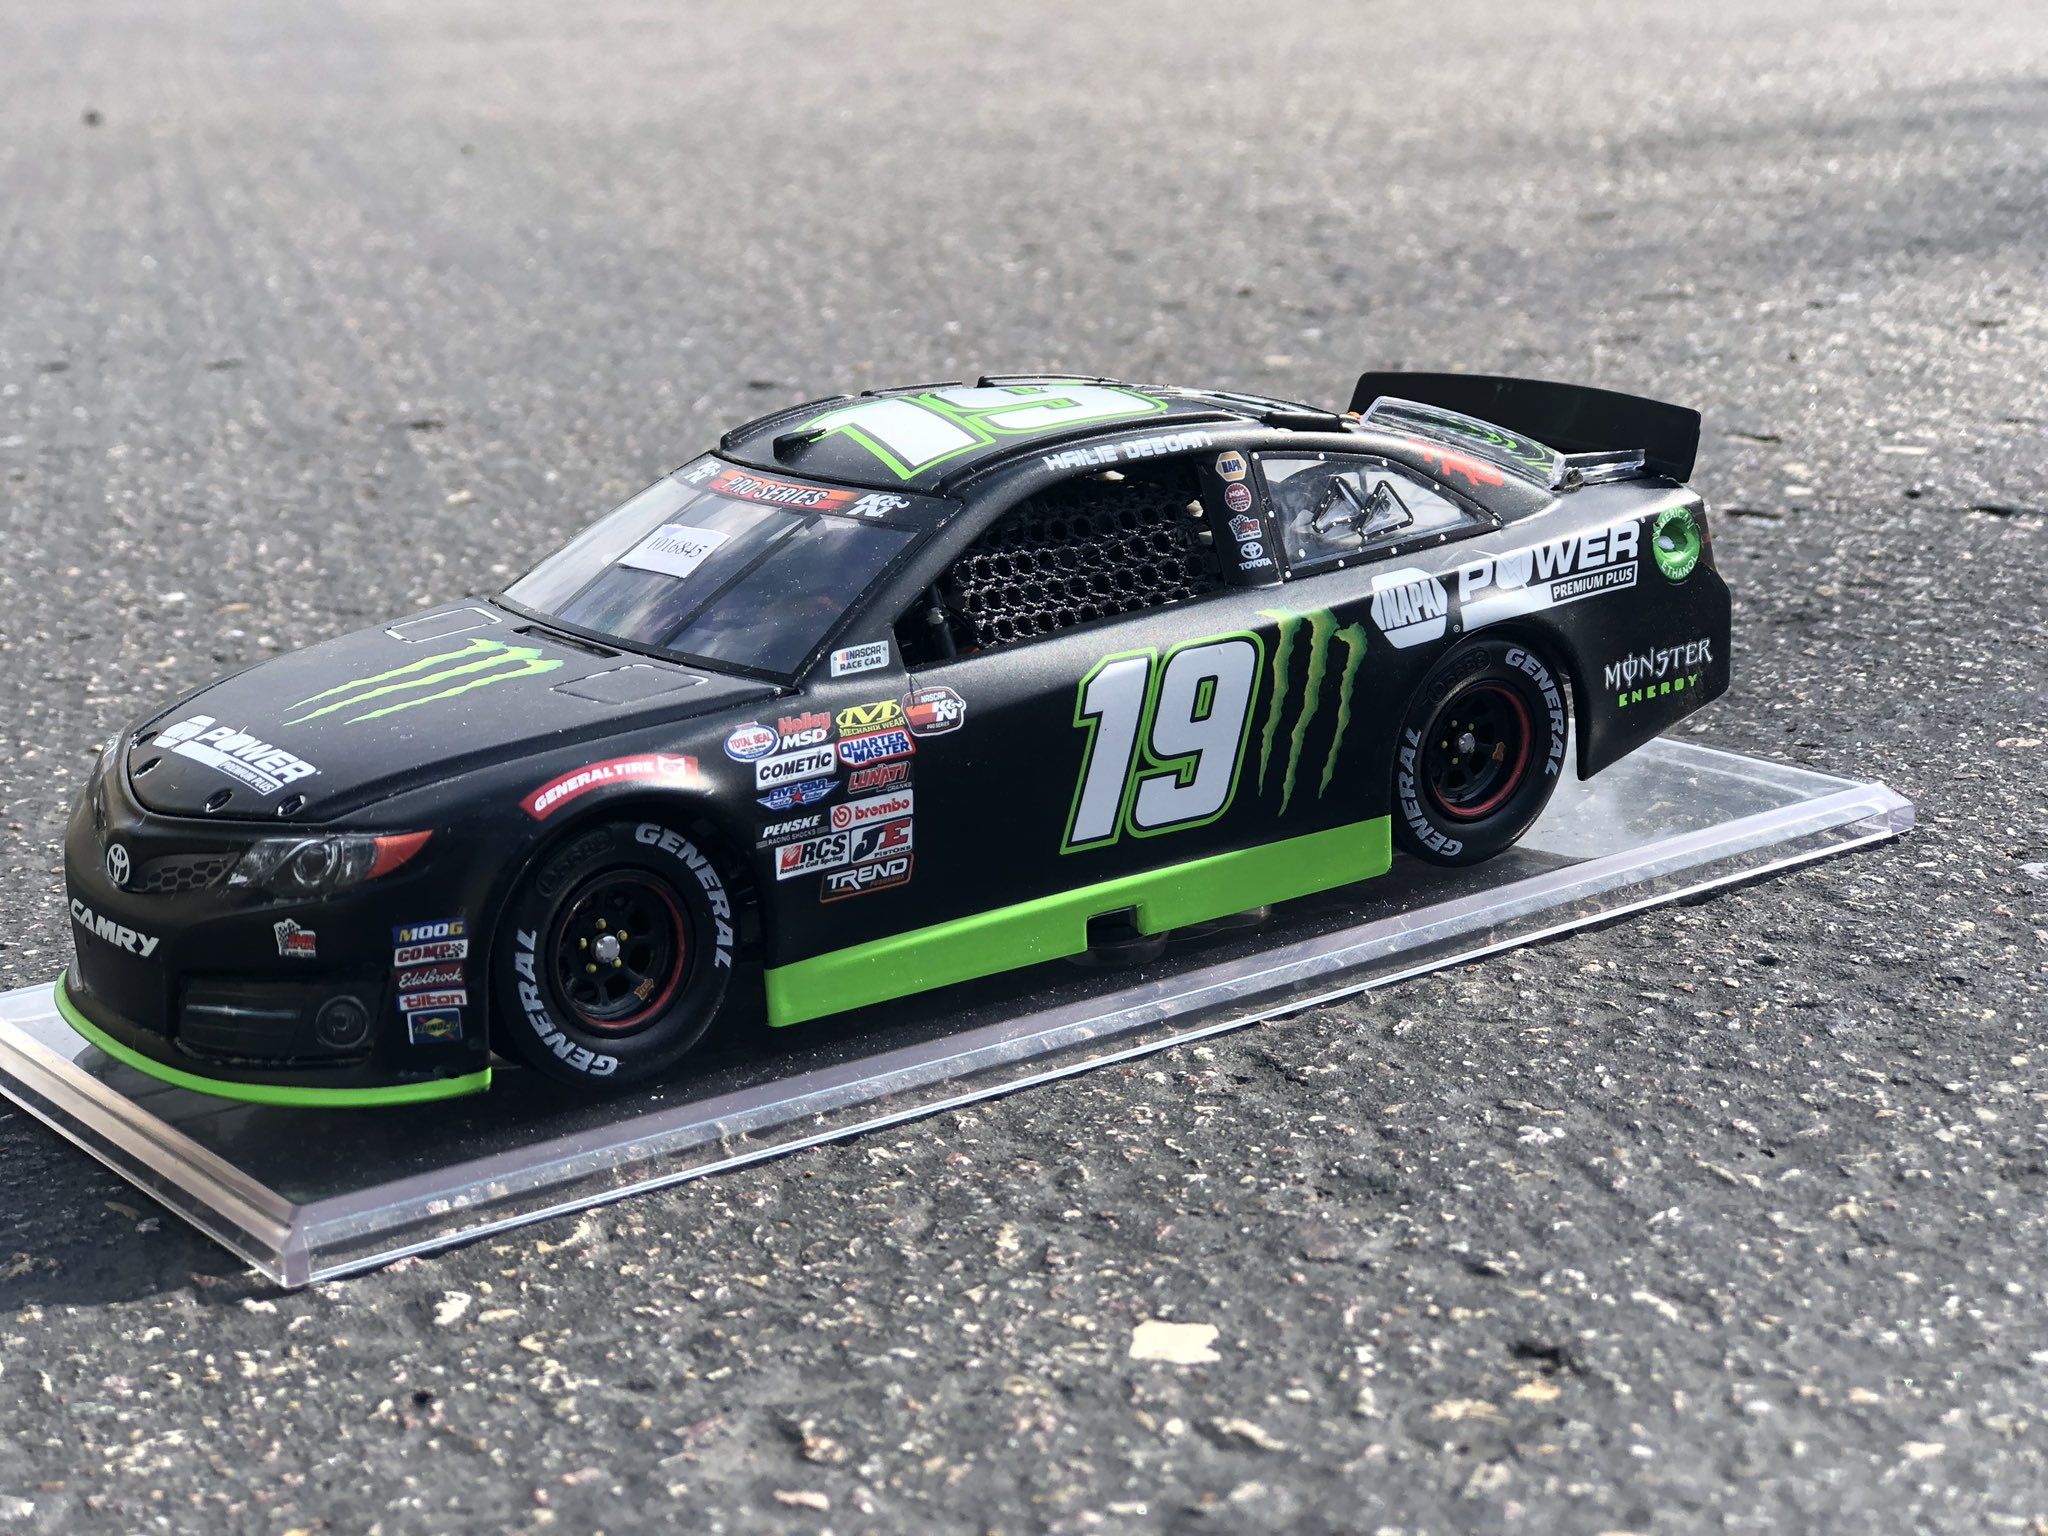 Hailie Deegan Monster Energy Diecast sample showed up and it's